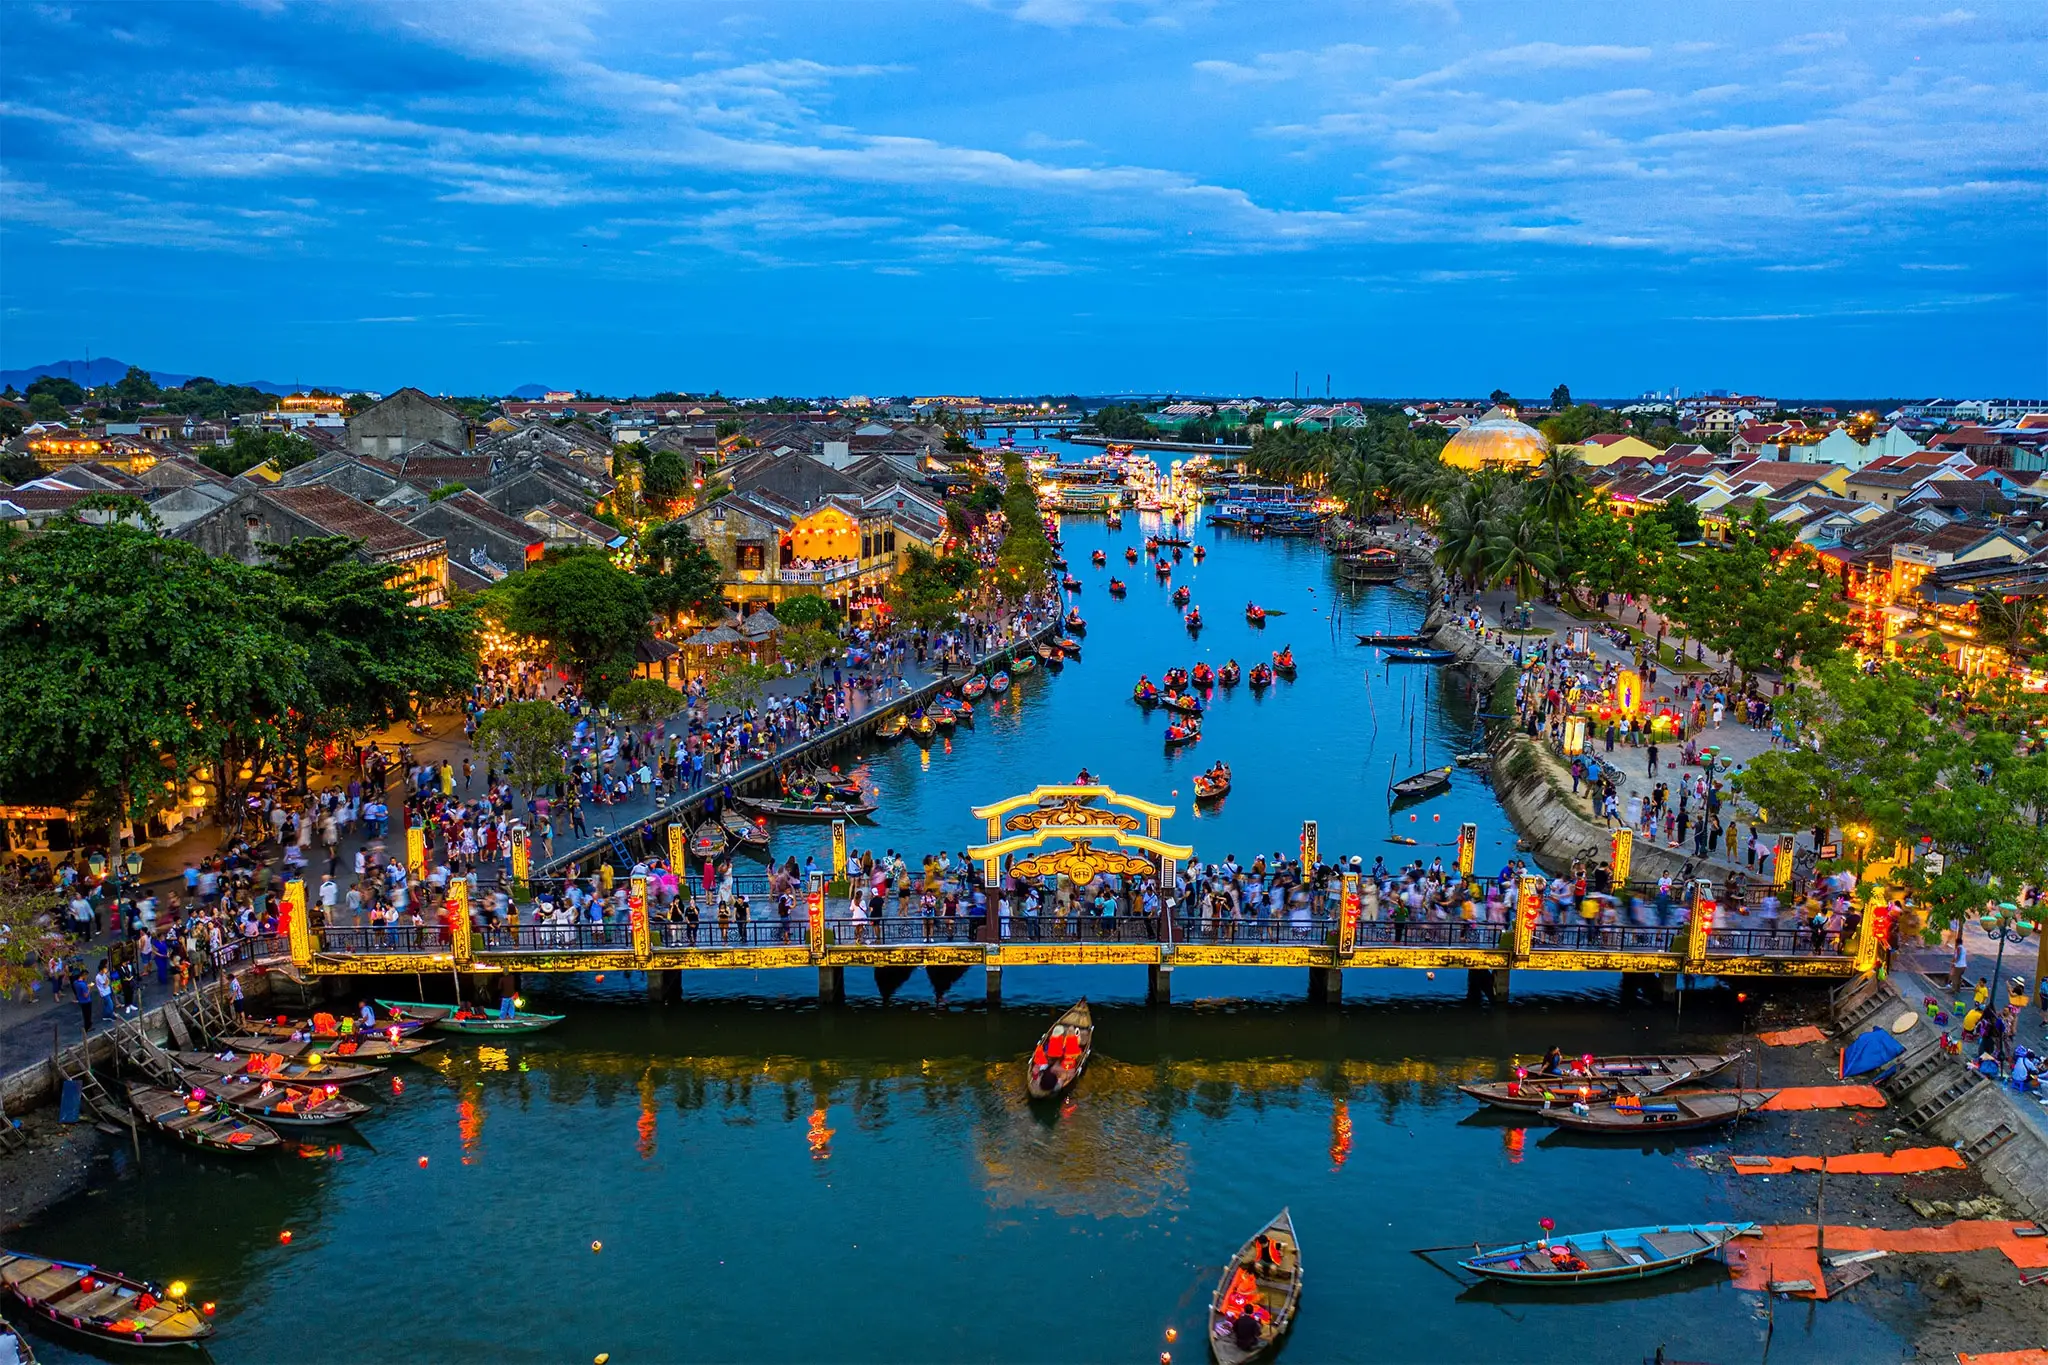 Hoi An Ancient Town Tour: Top 12 Things You Should Know